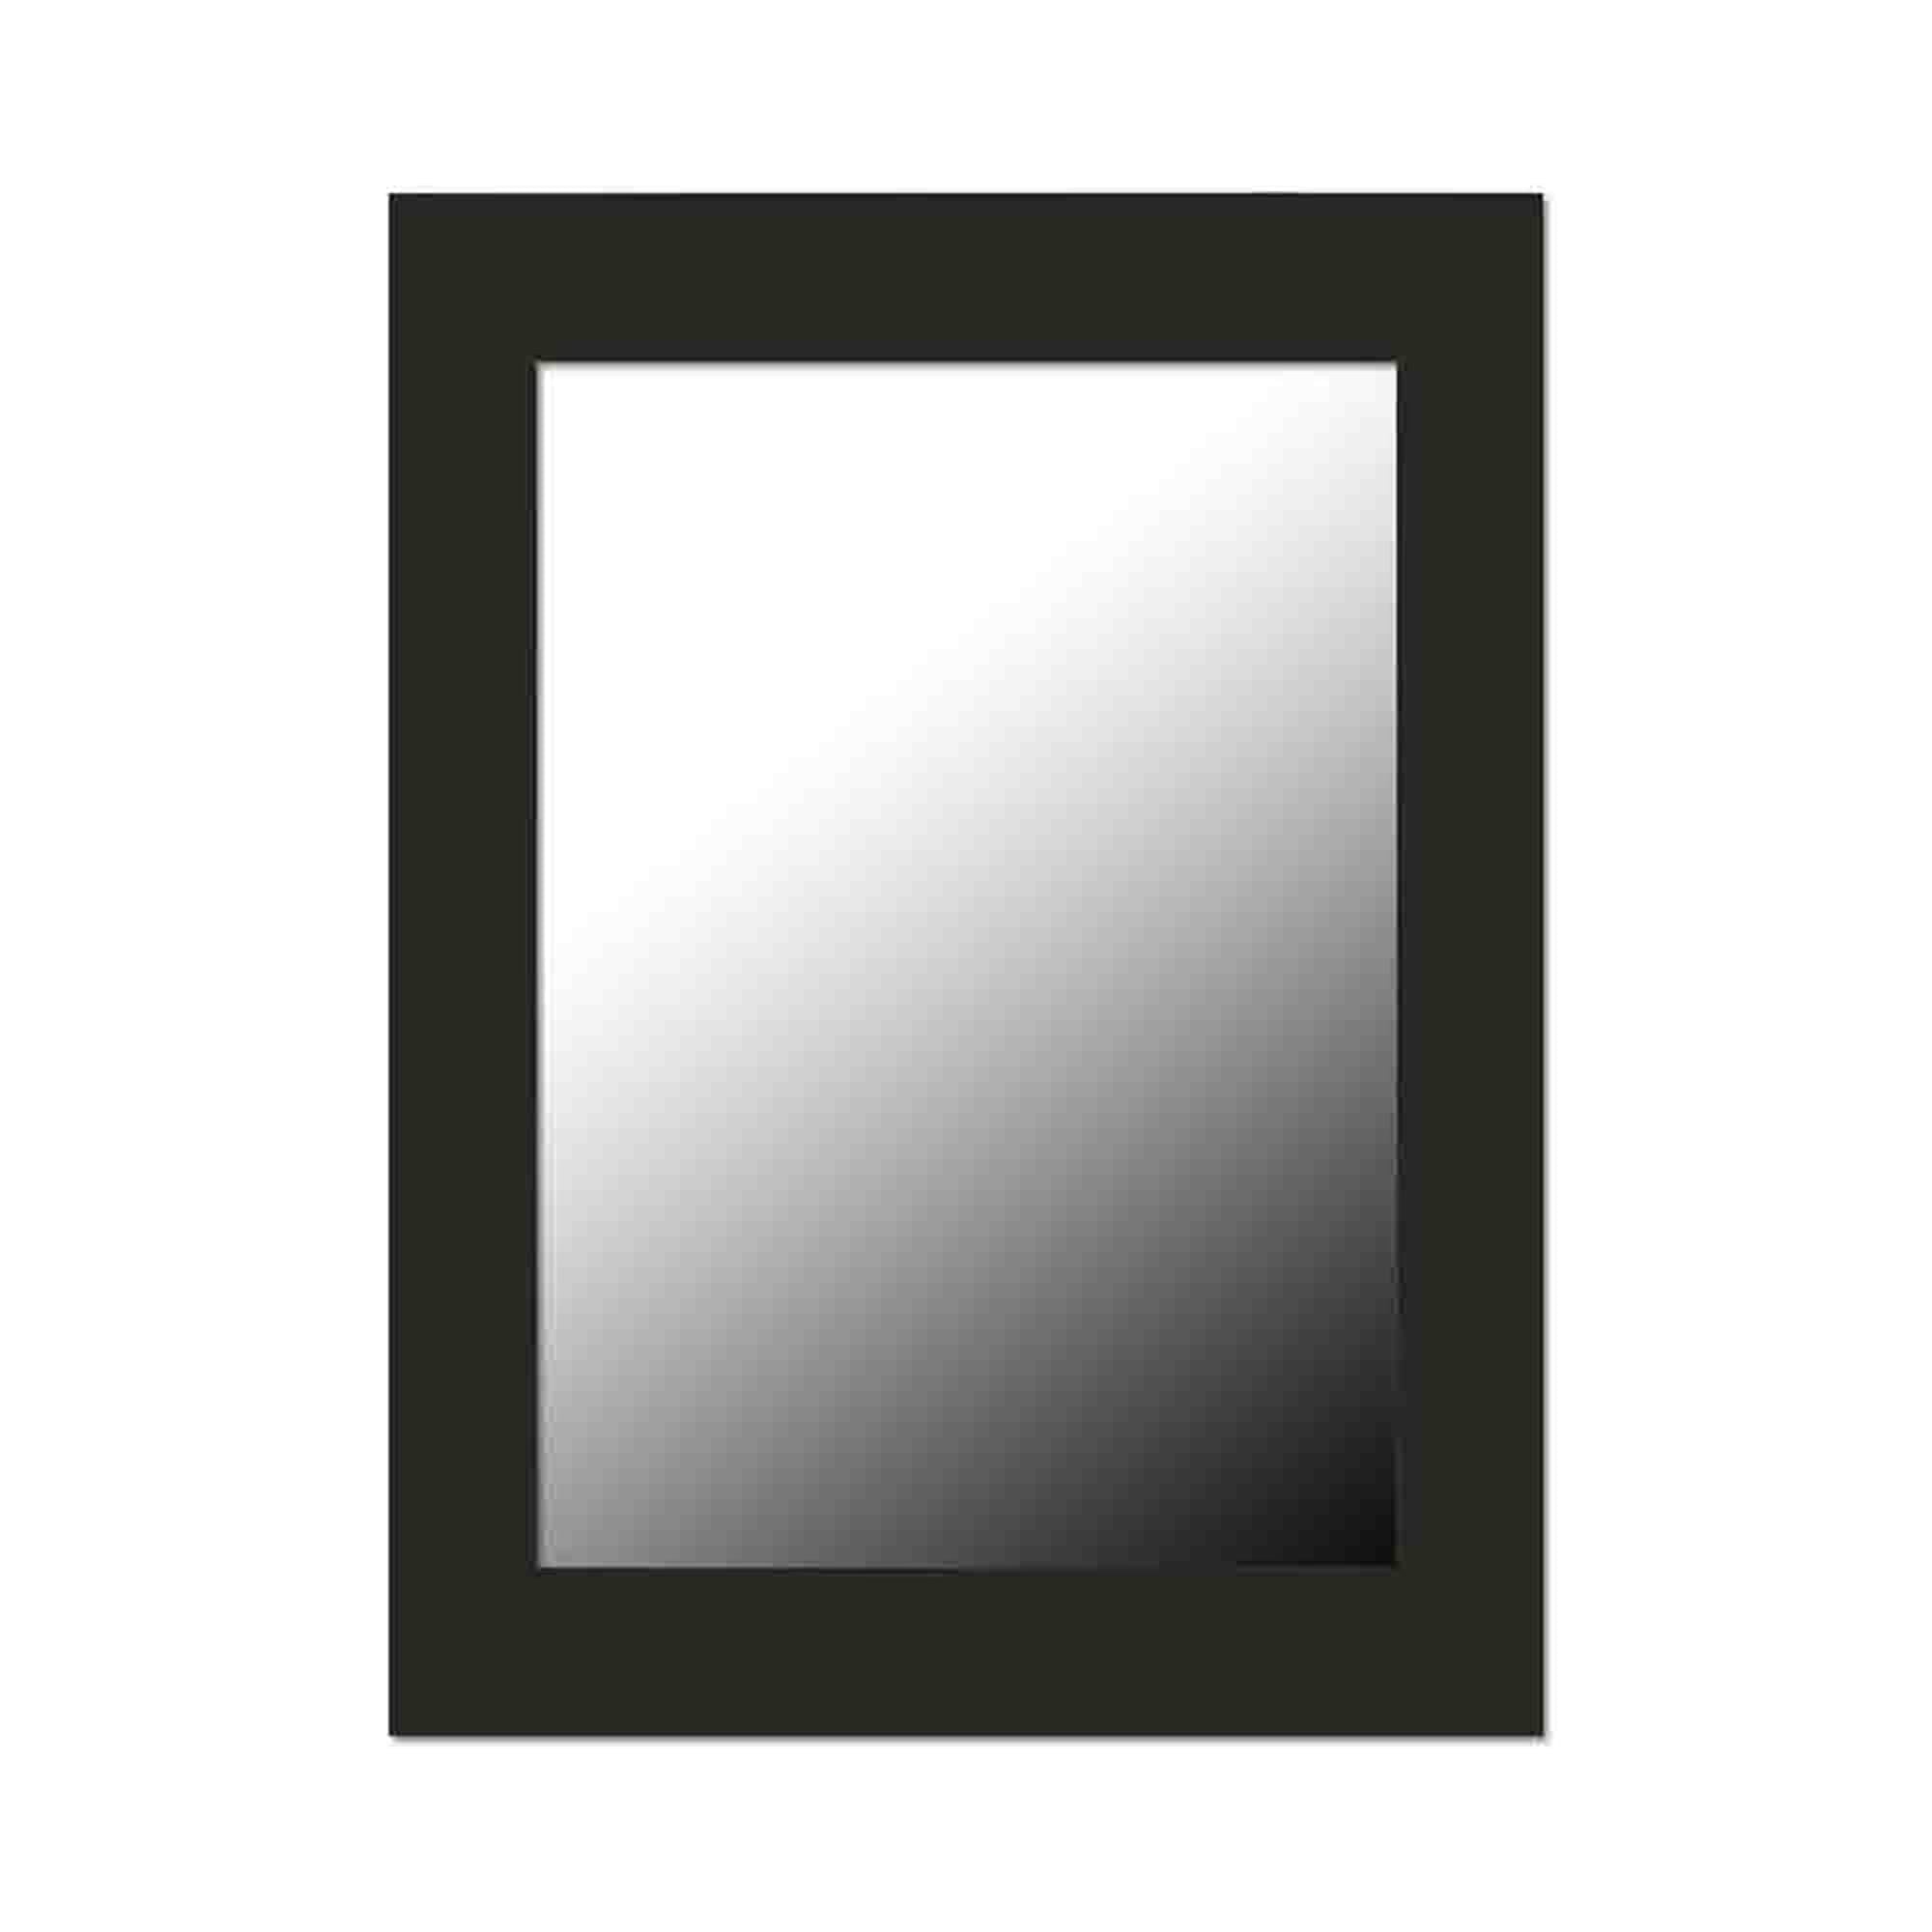 Home Basics Contemporary Rectangle Wall Mirror, Black $5.00 EACH, CASE PACK OF 6